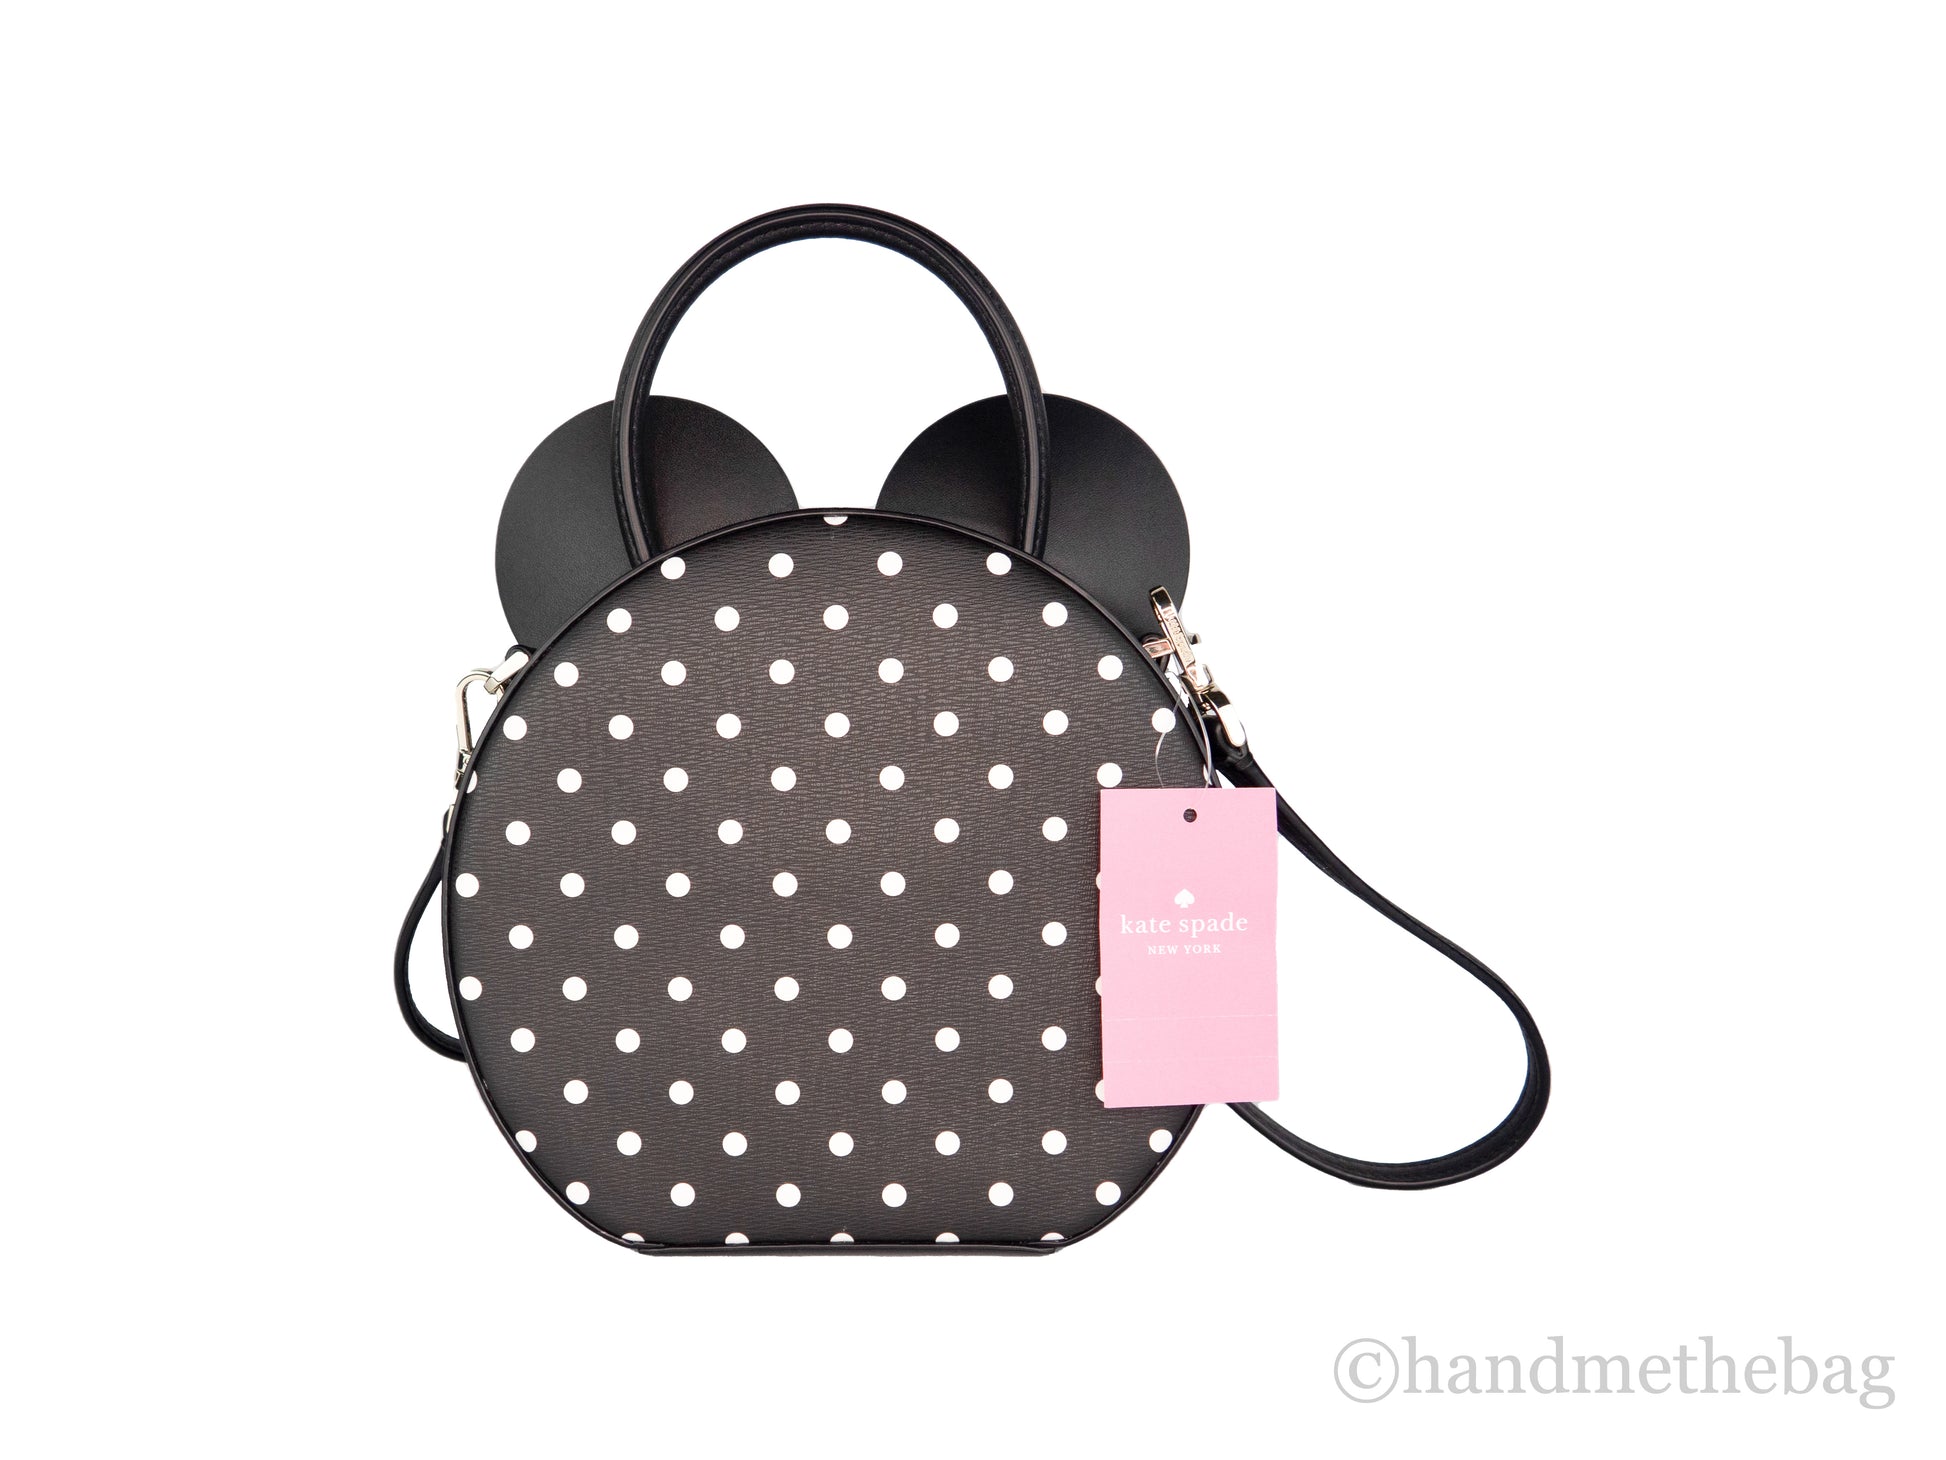 Kate Spade X Disney Minnie Mouse Small Leather Crossbody